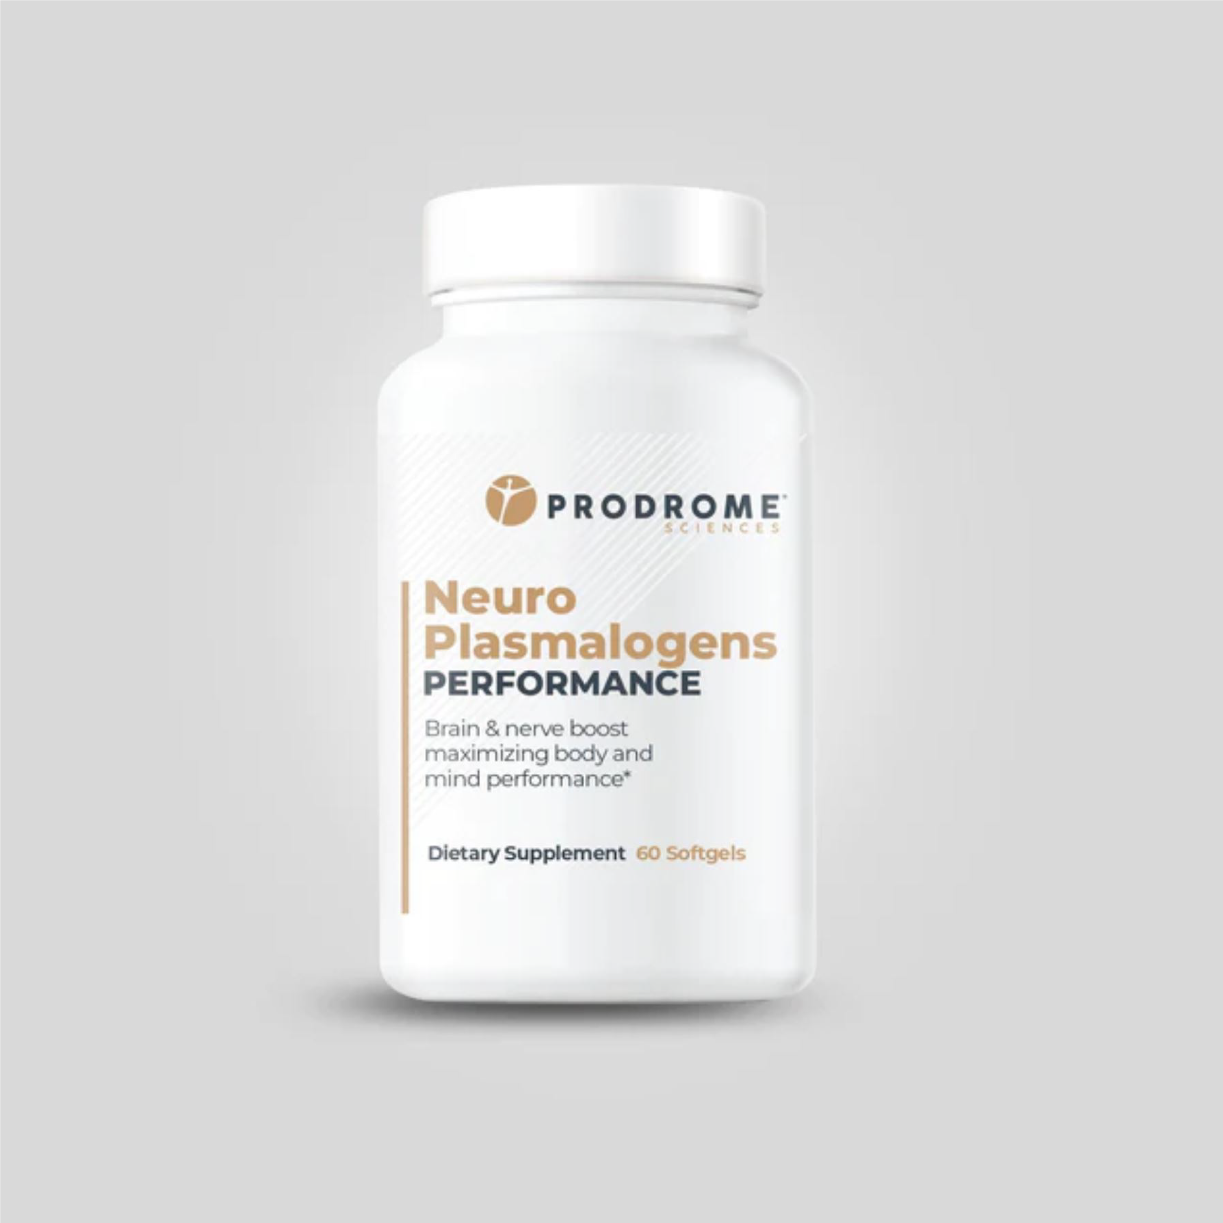 A bottle of Prodrome's Neuro Plasmalogen, formulated to support cellular function and enhance neuron membranes.